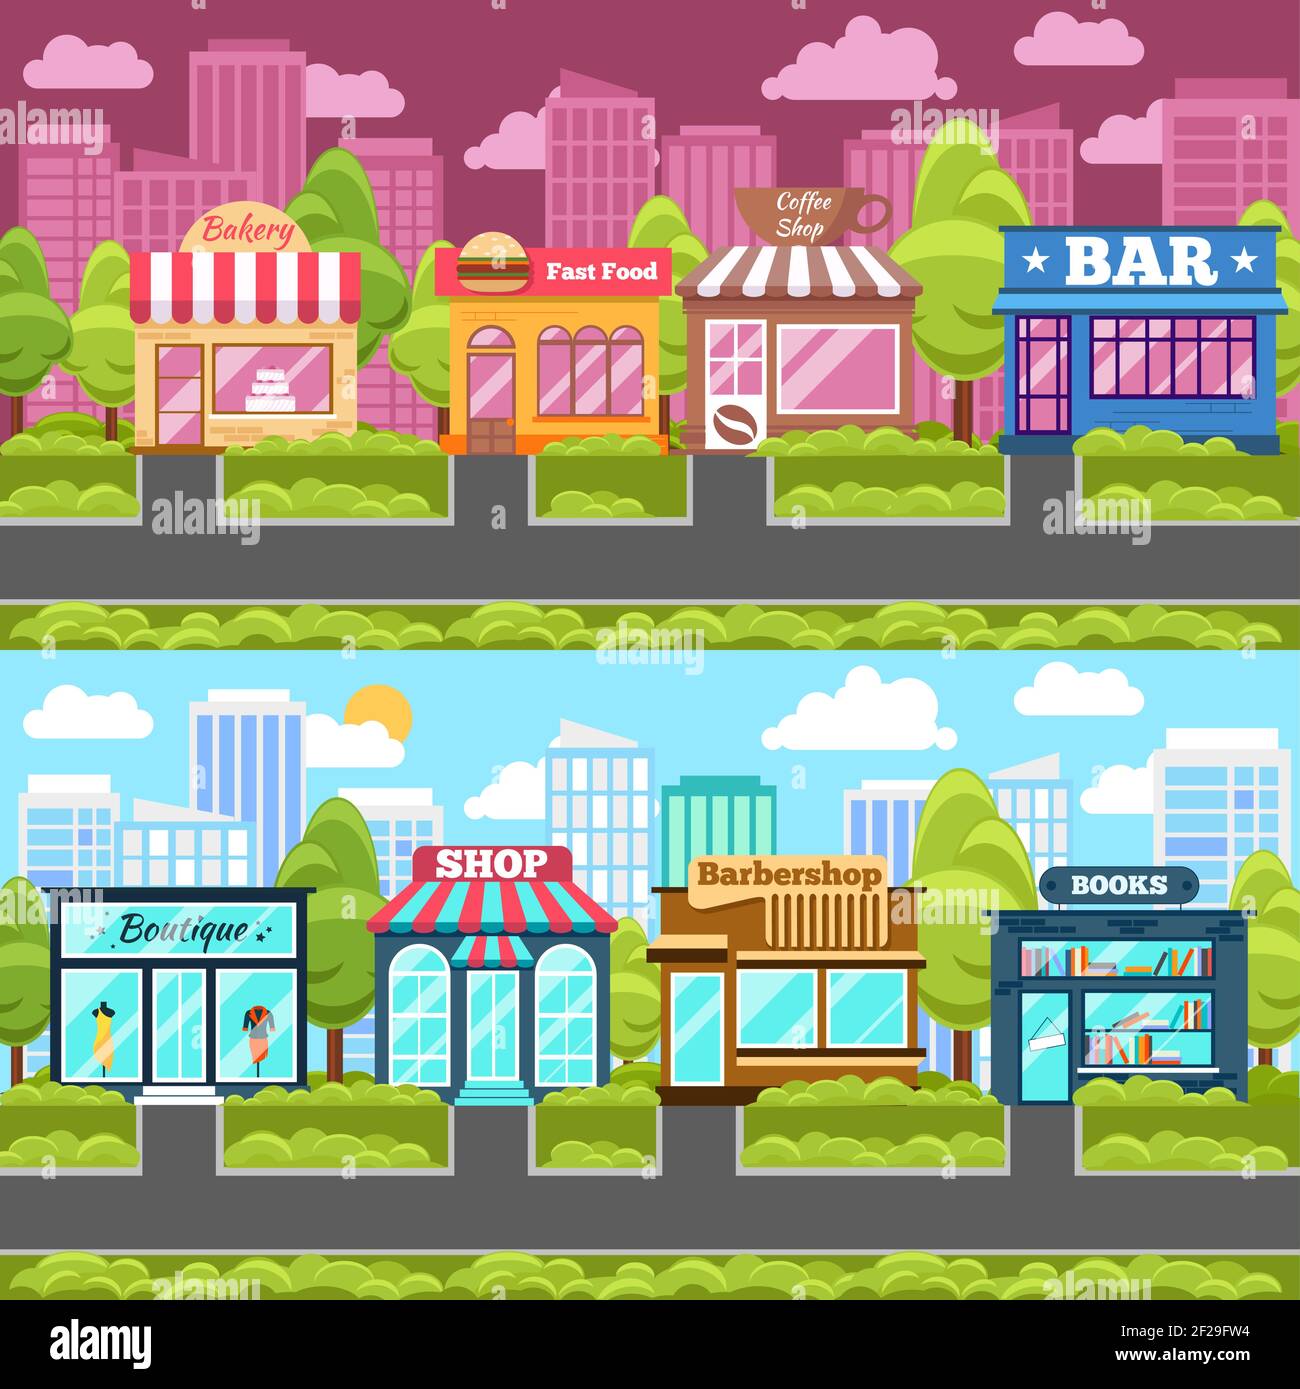 Shops and stores city street. Fast food, book and coffee bar, barbershop and bakery. Vector illustration Stock Vector